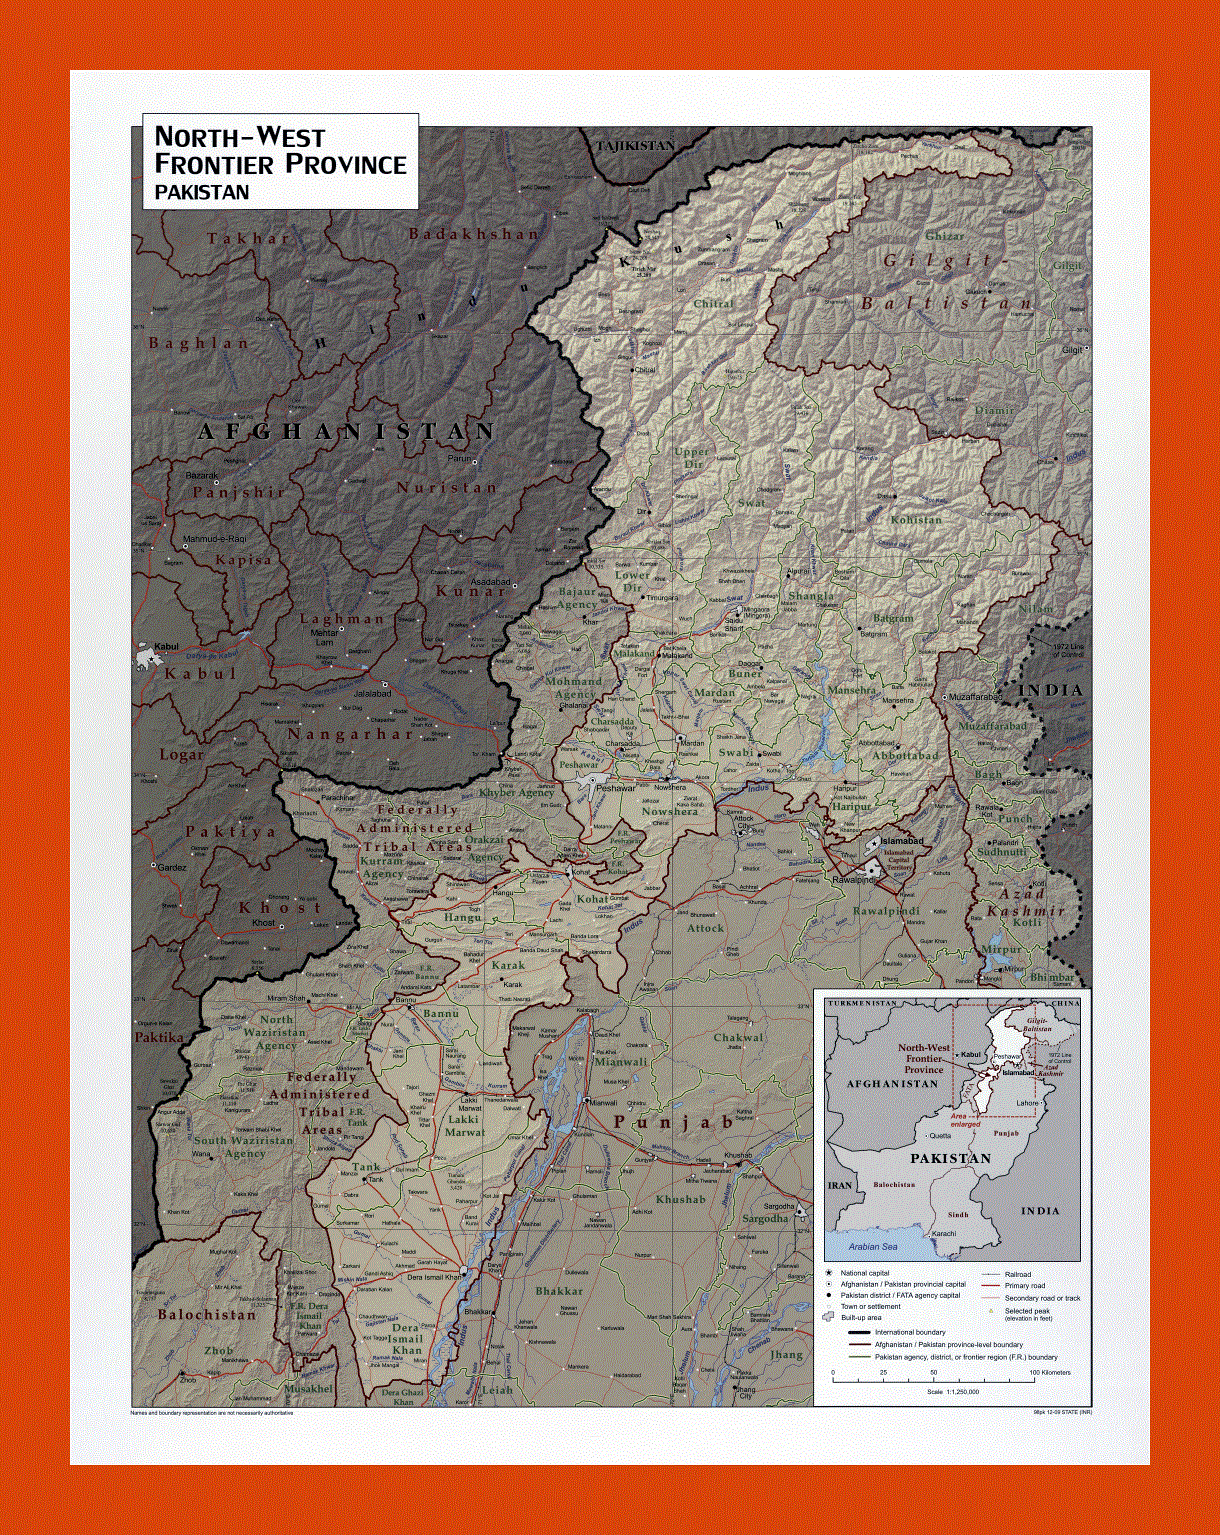 North West Frontier Province of Pakistan map - 2009